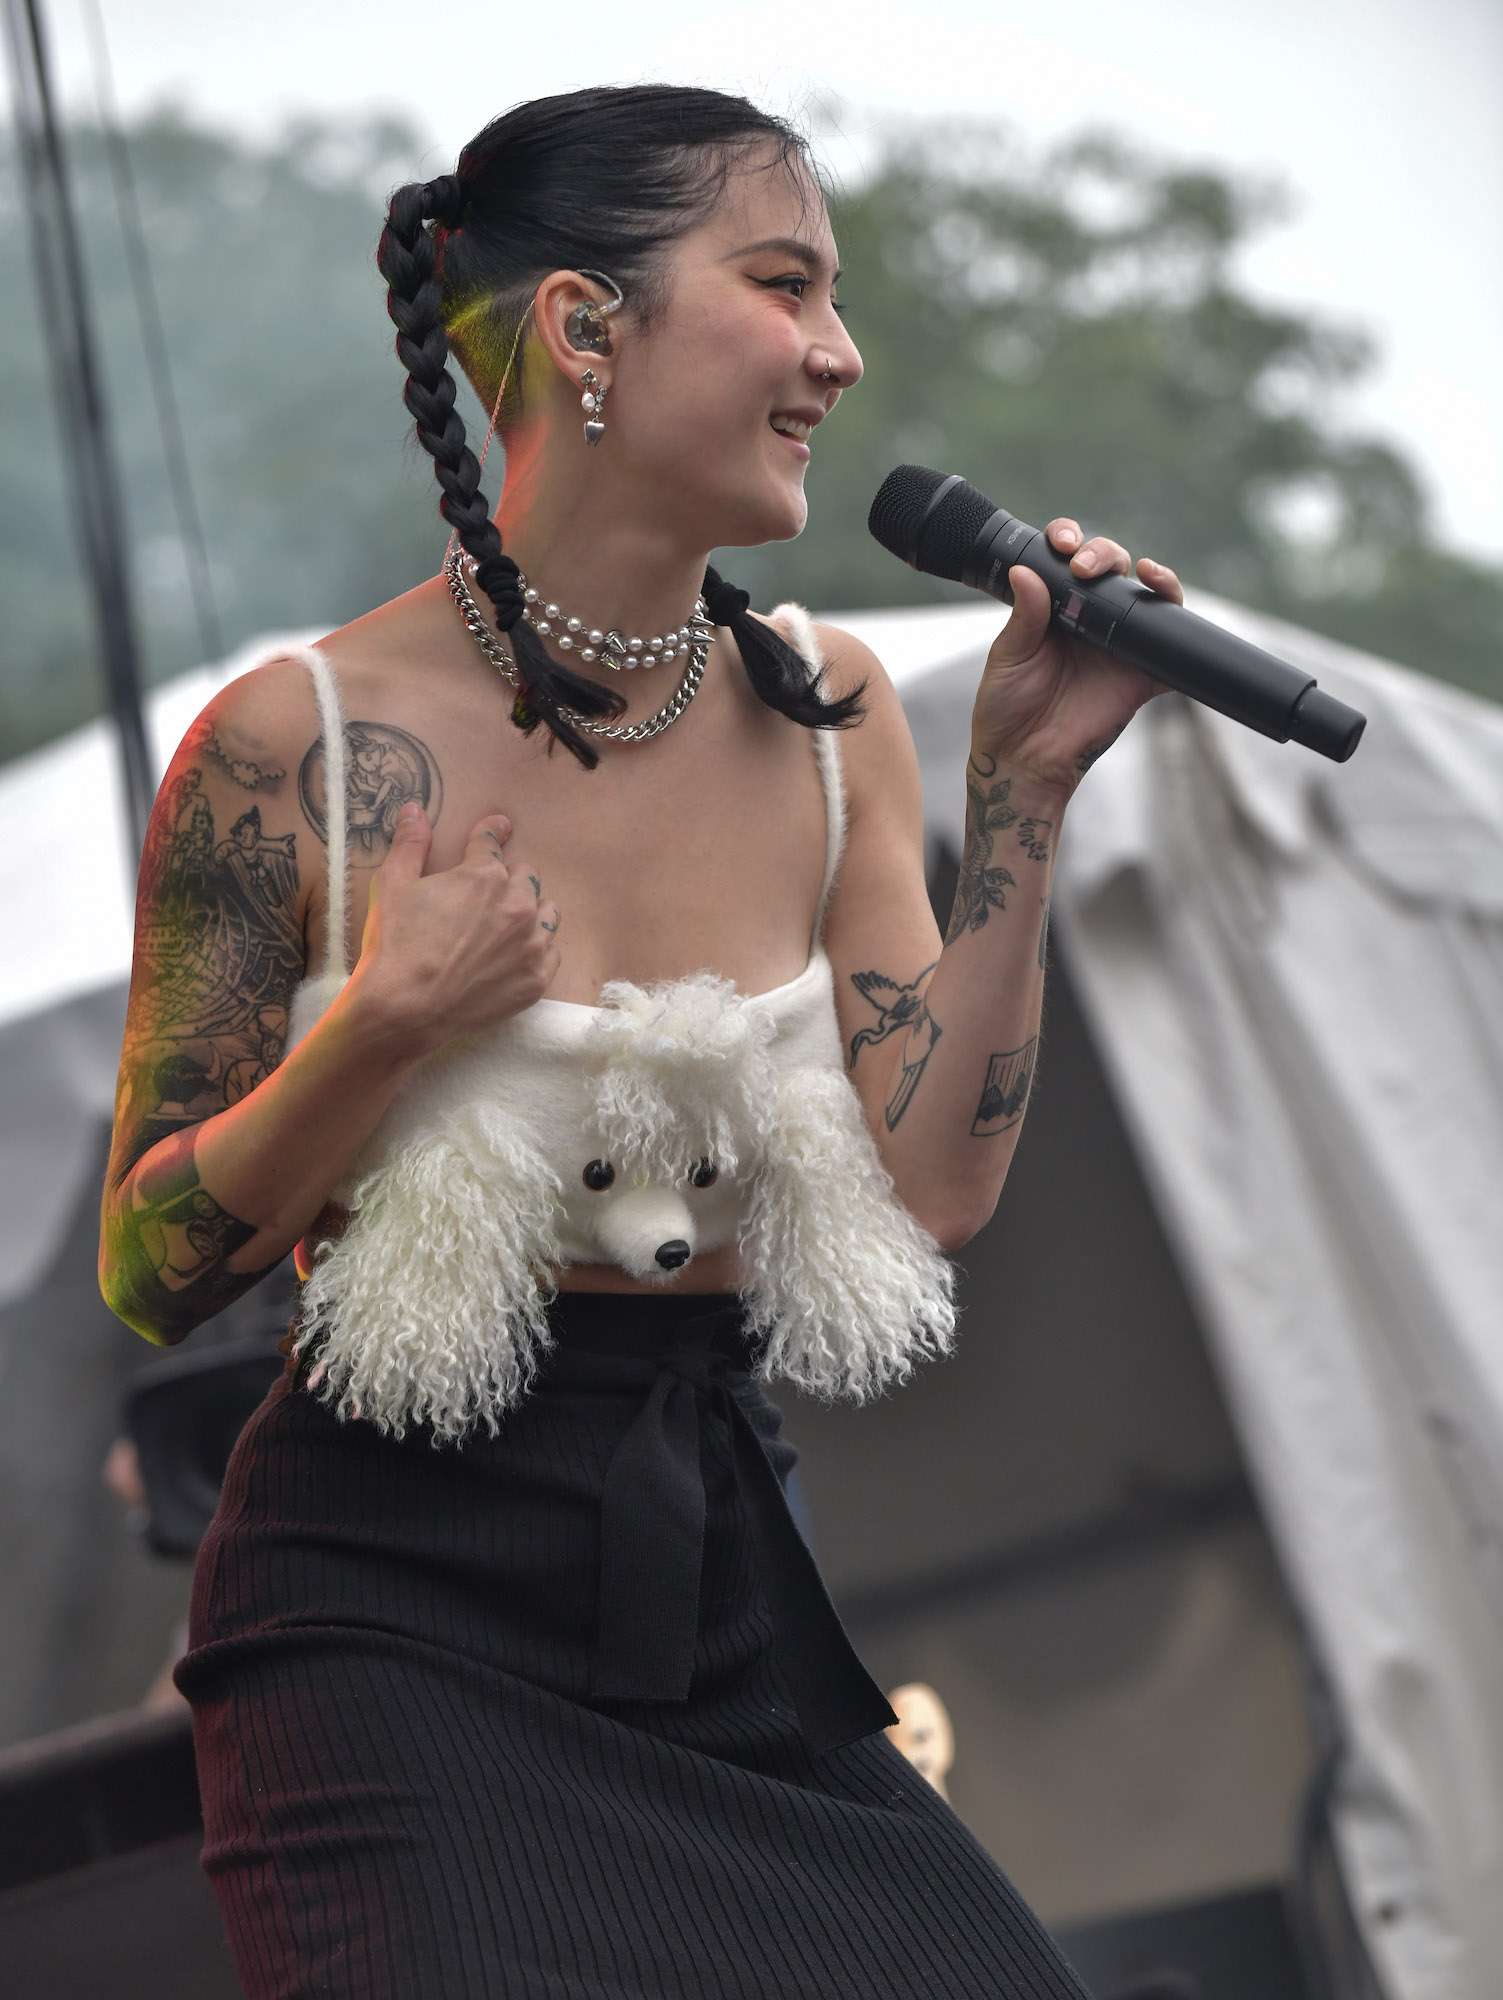 Japanese Breakfast Live At Pitchfork [GALLERY] 8